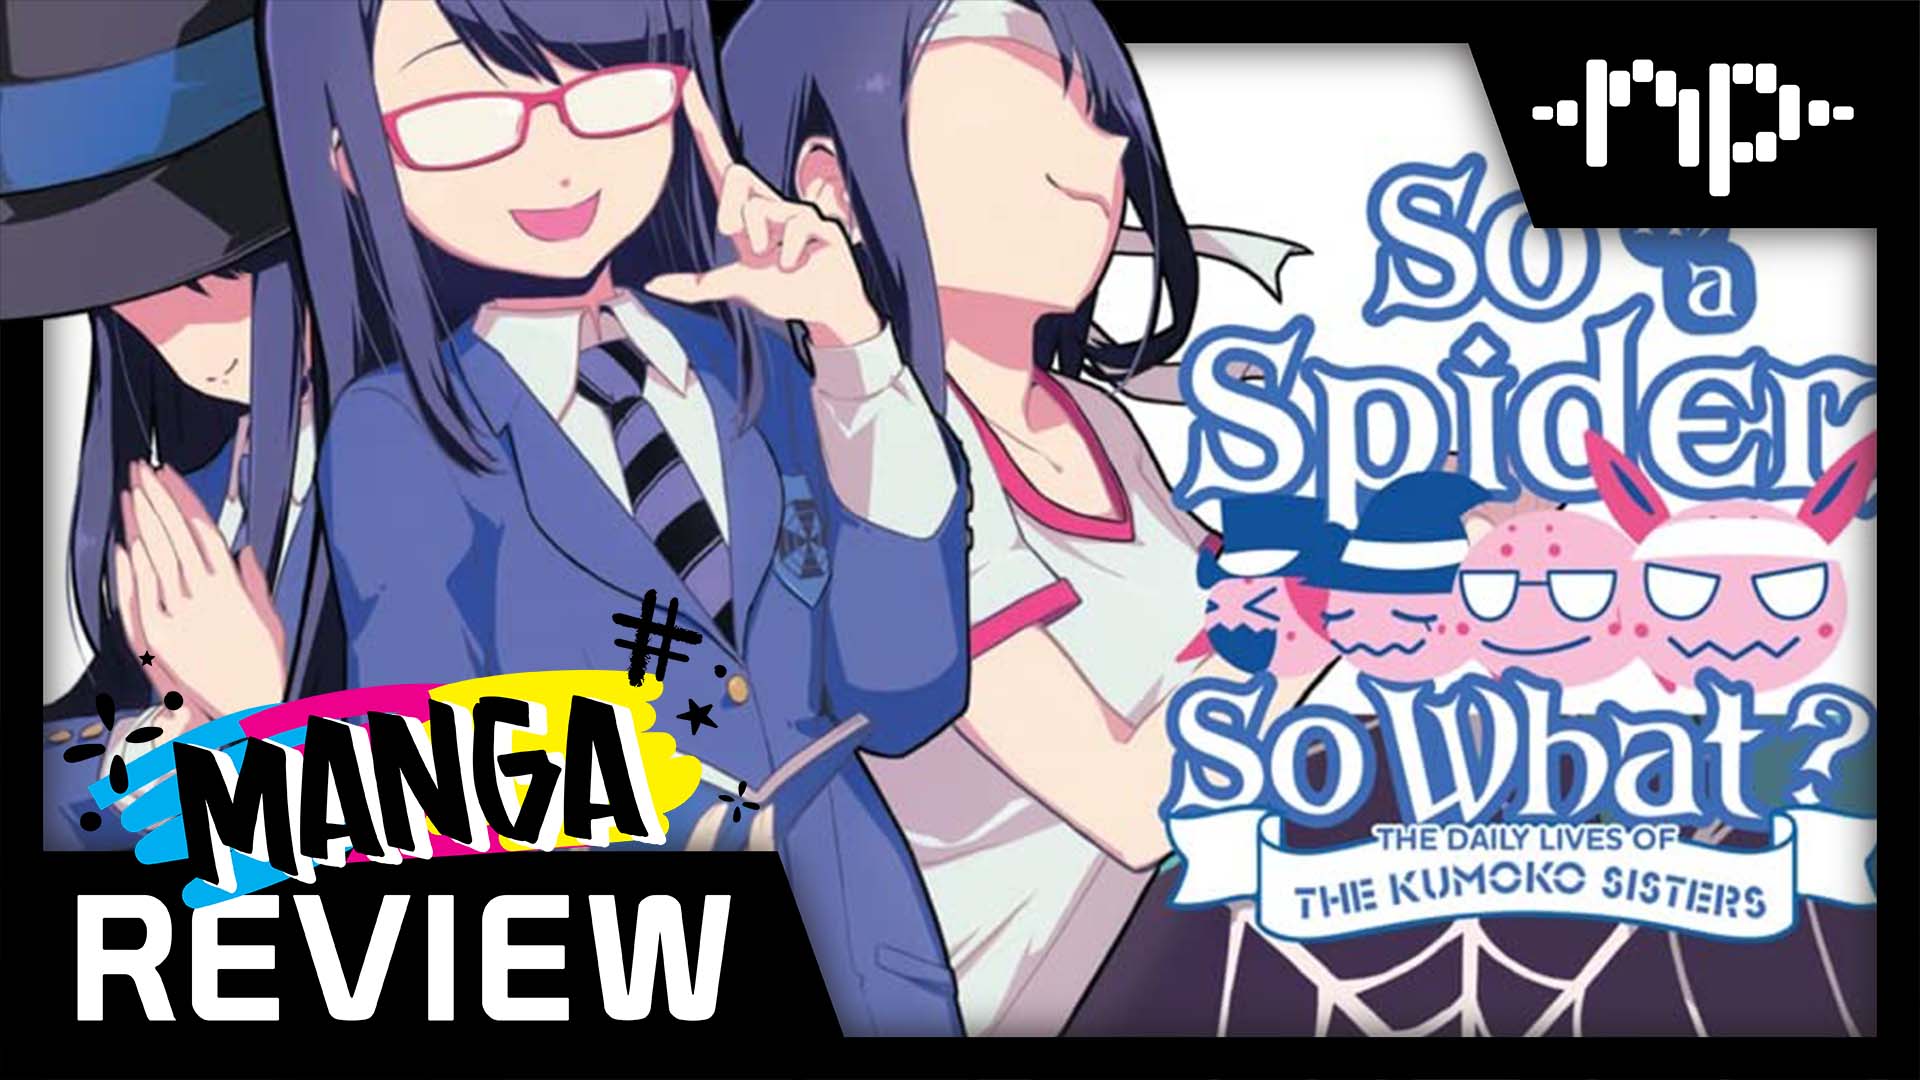 The Daily Lives of the Kumoko Sisters Vol. 1 Review – Pure Insanity